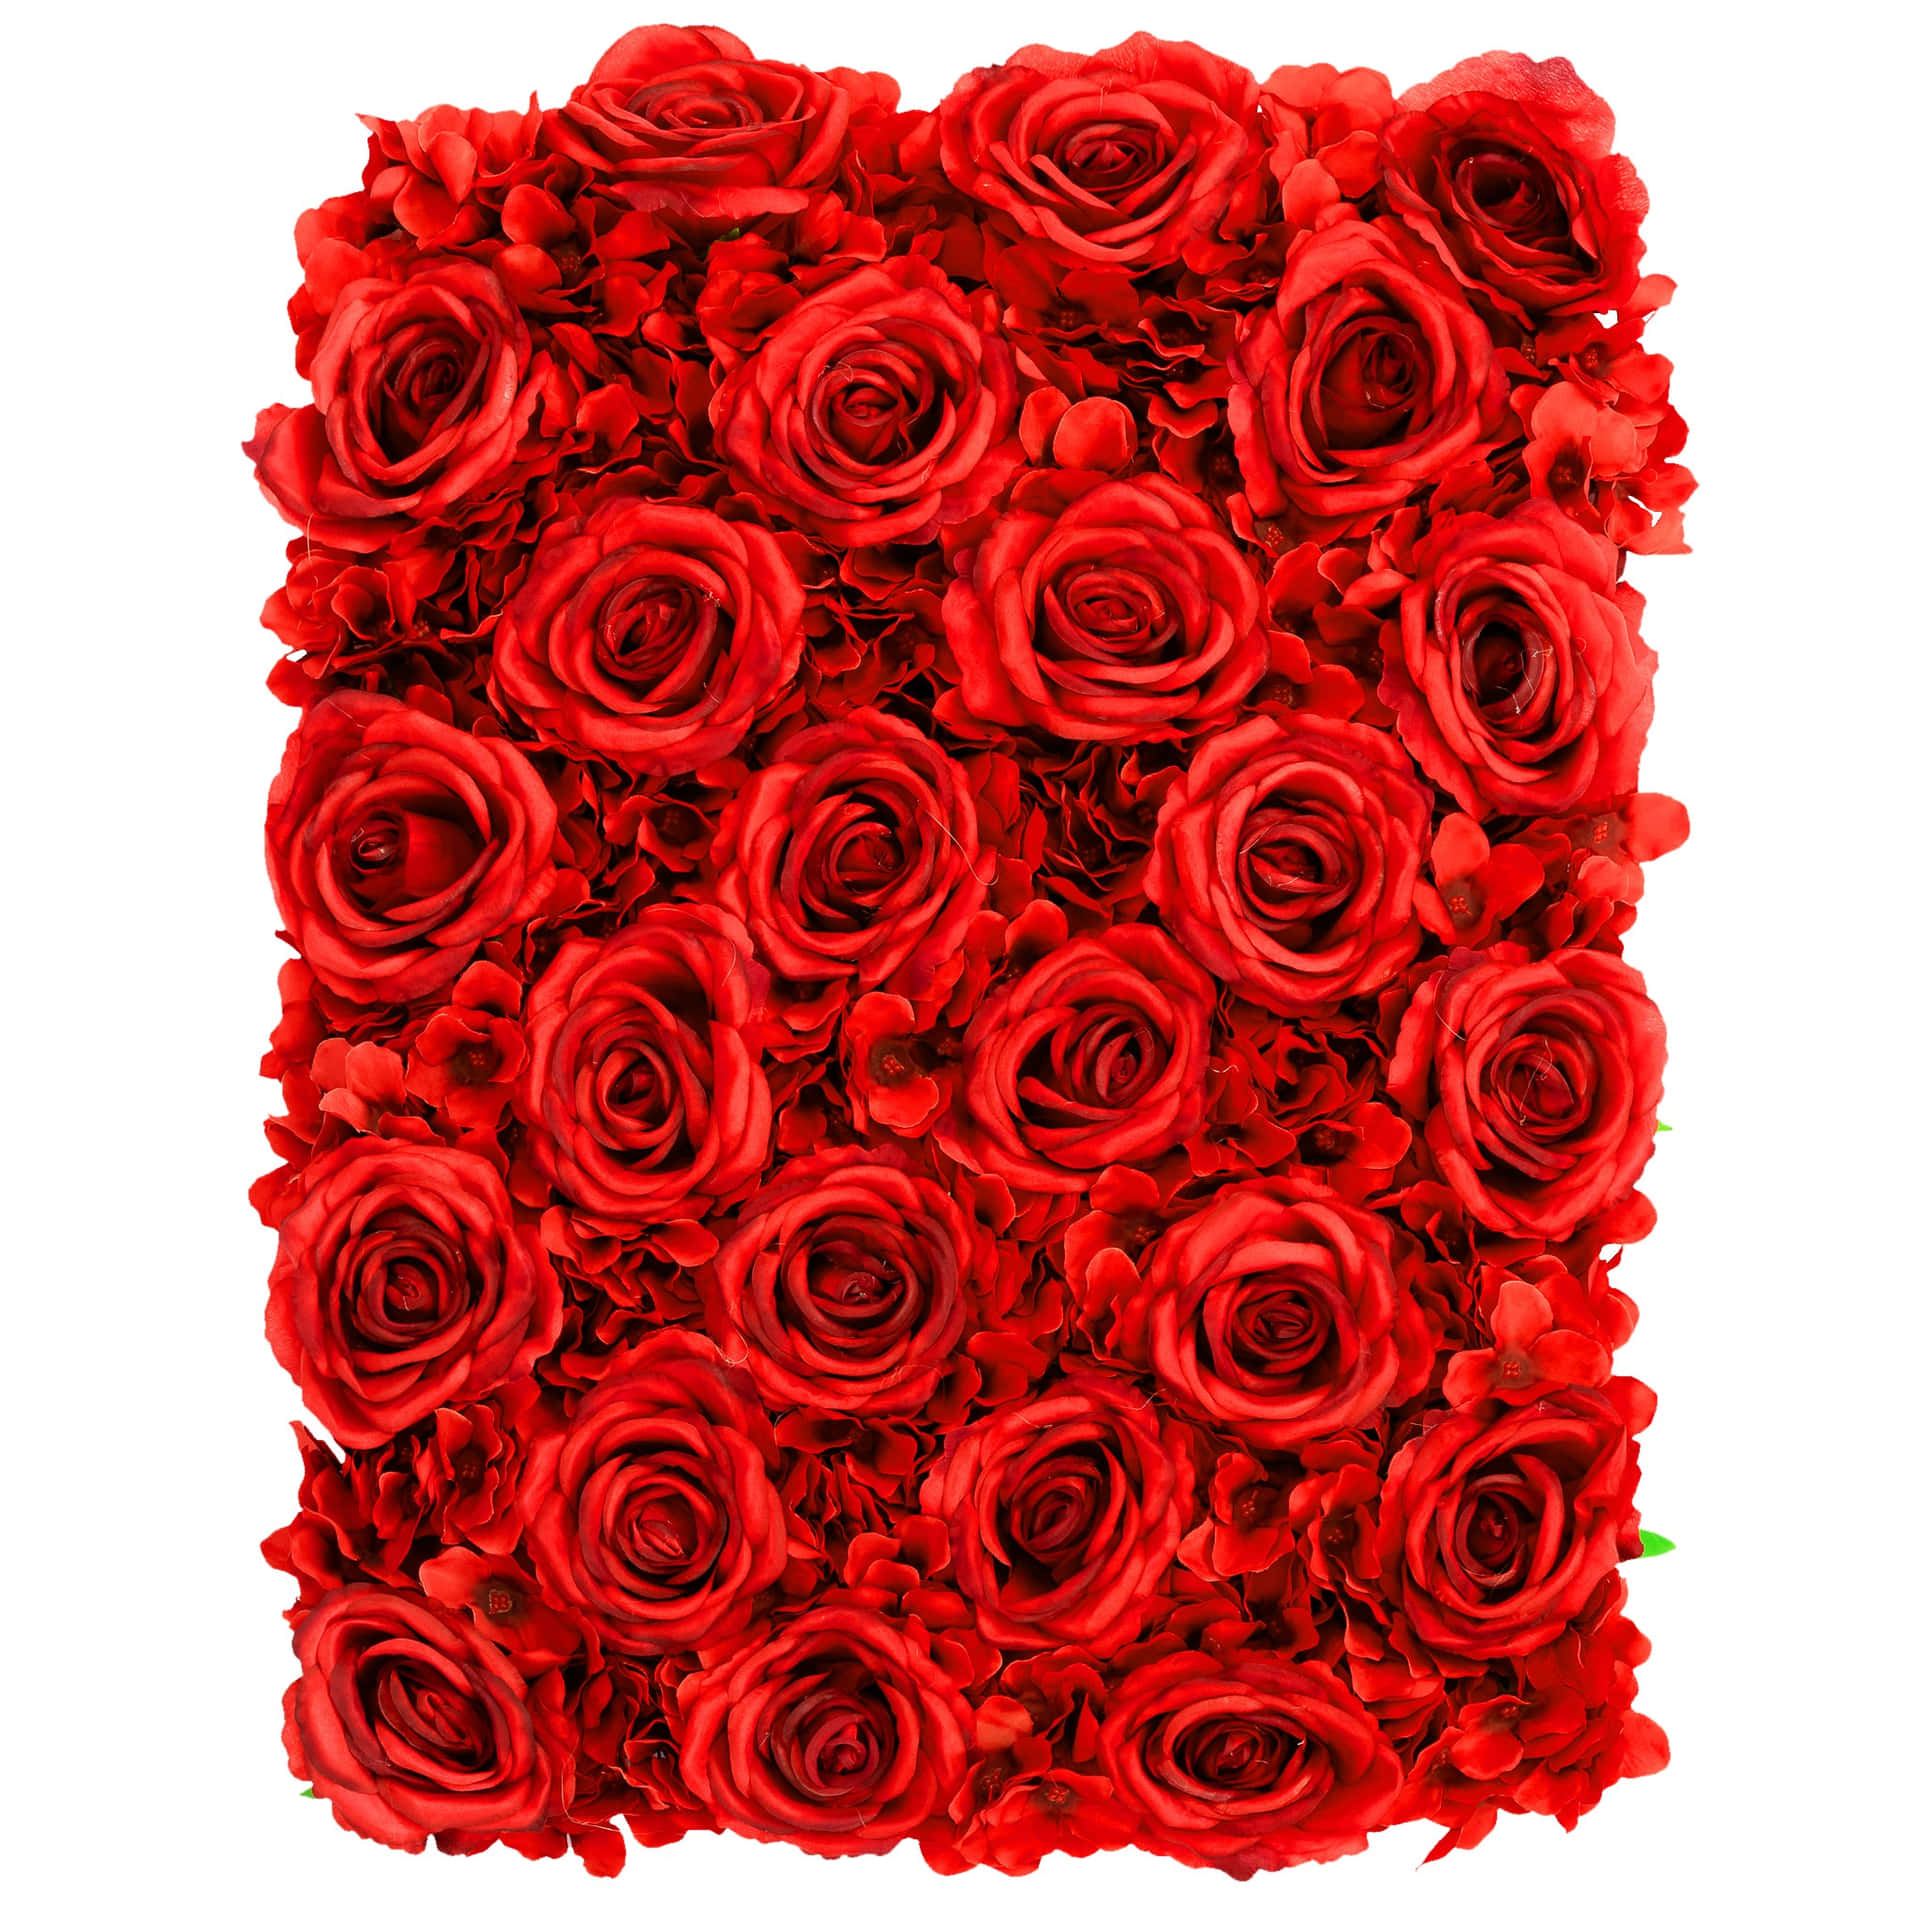 Many intense Red Roses with beautiful details.